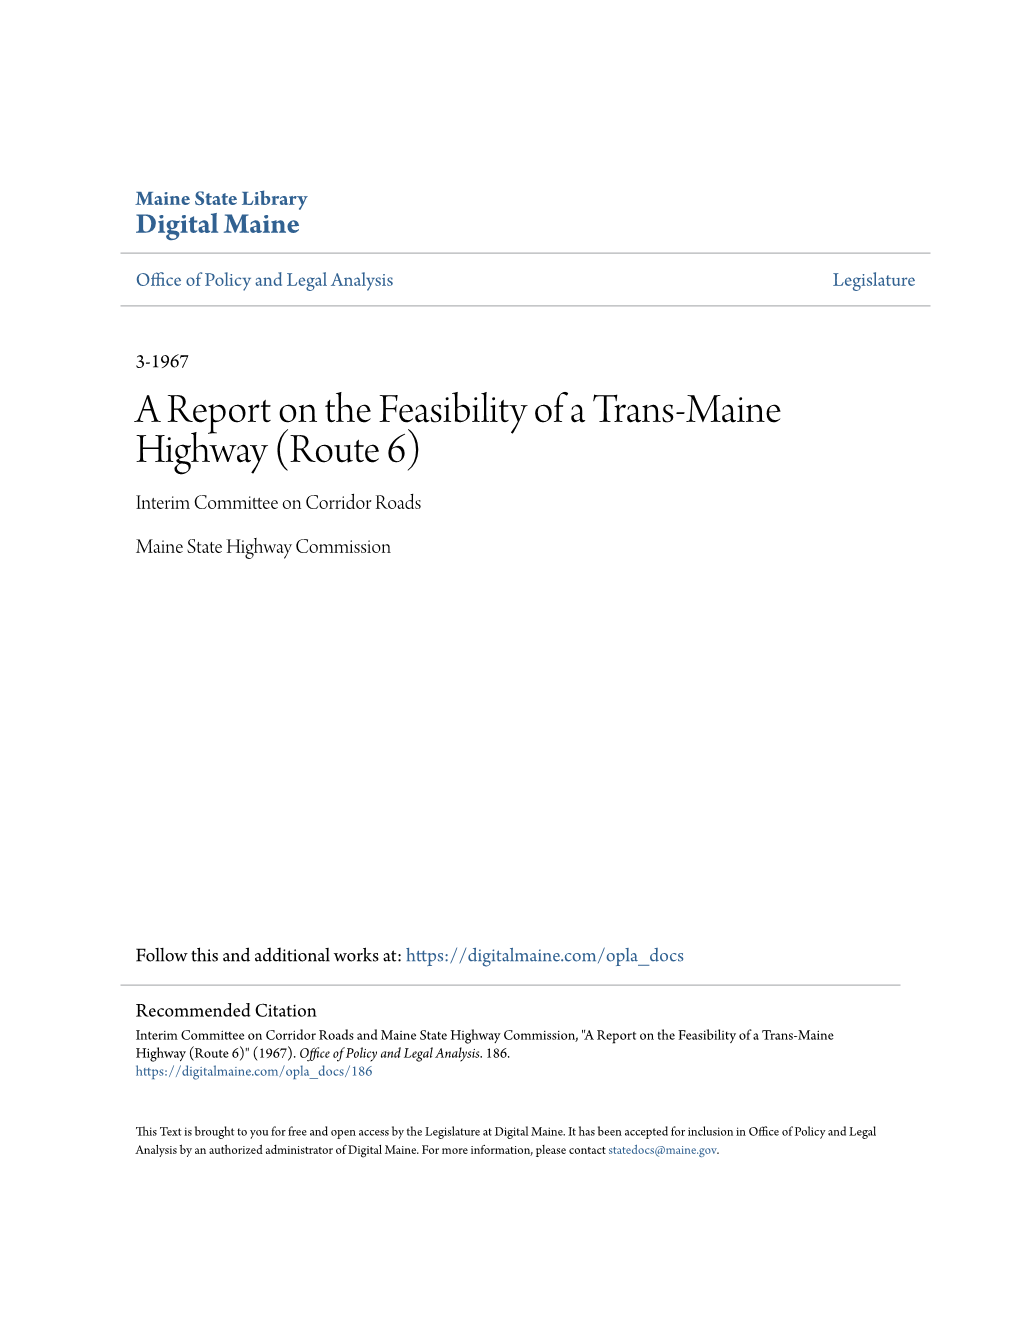 A Report on the Feasibility of a Trans-Maine Highway (Route 6) Interim Committee on Corridor Roads